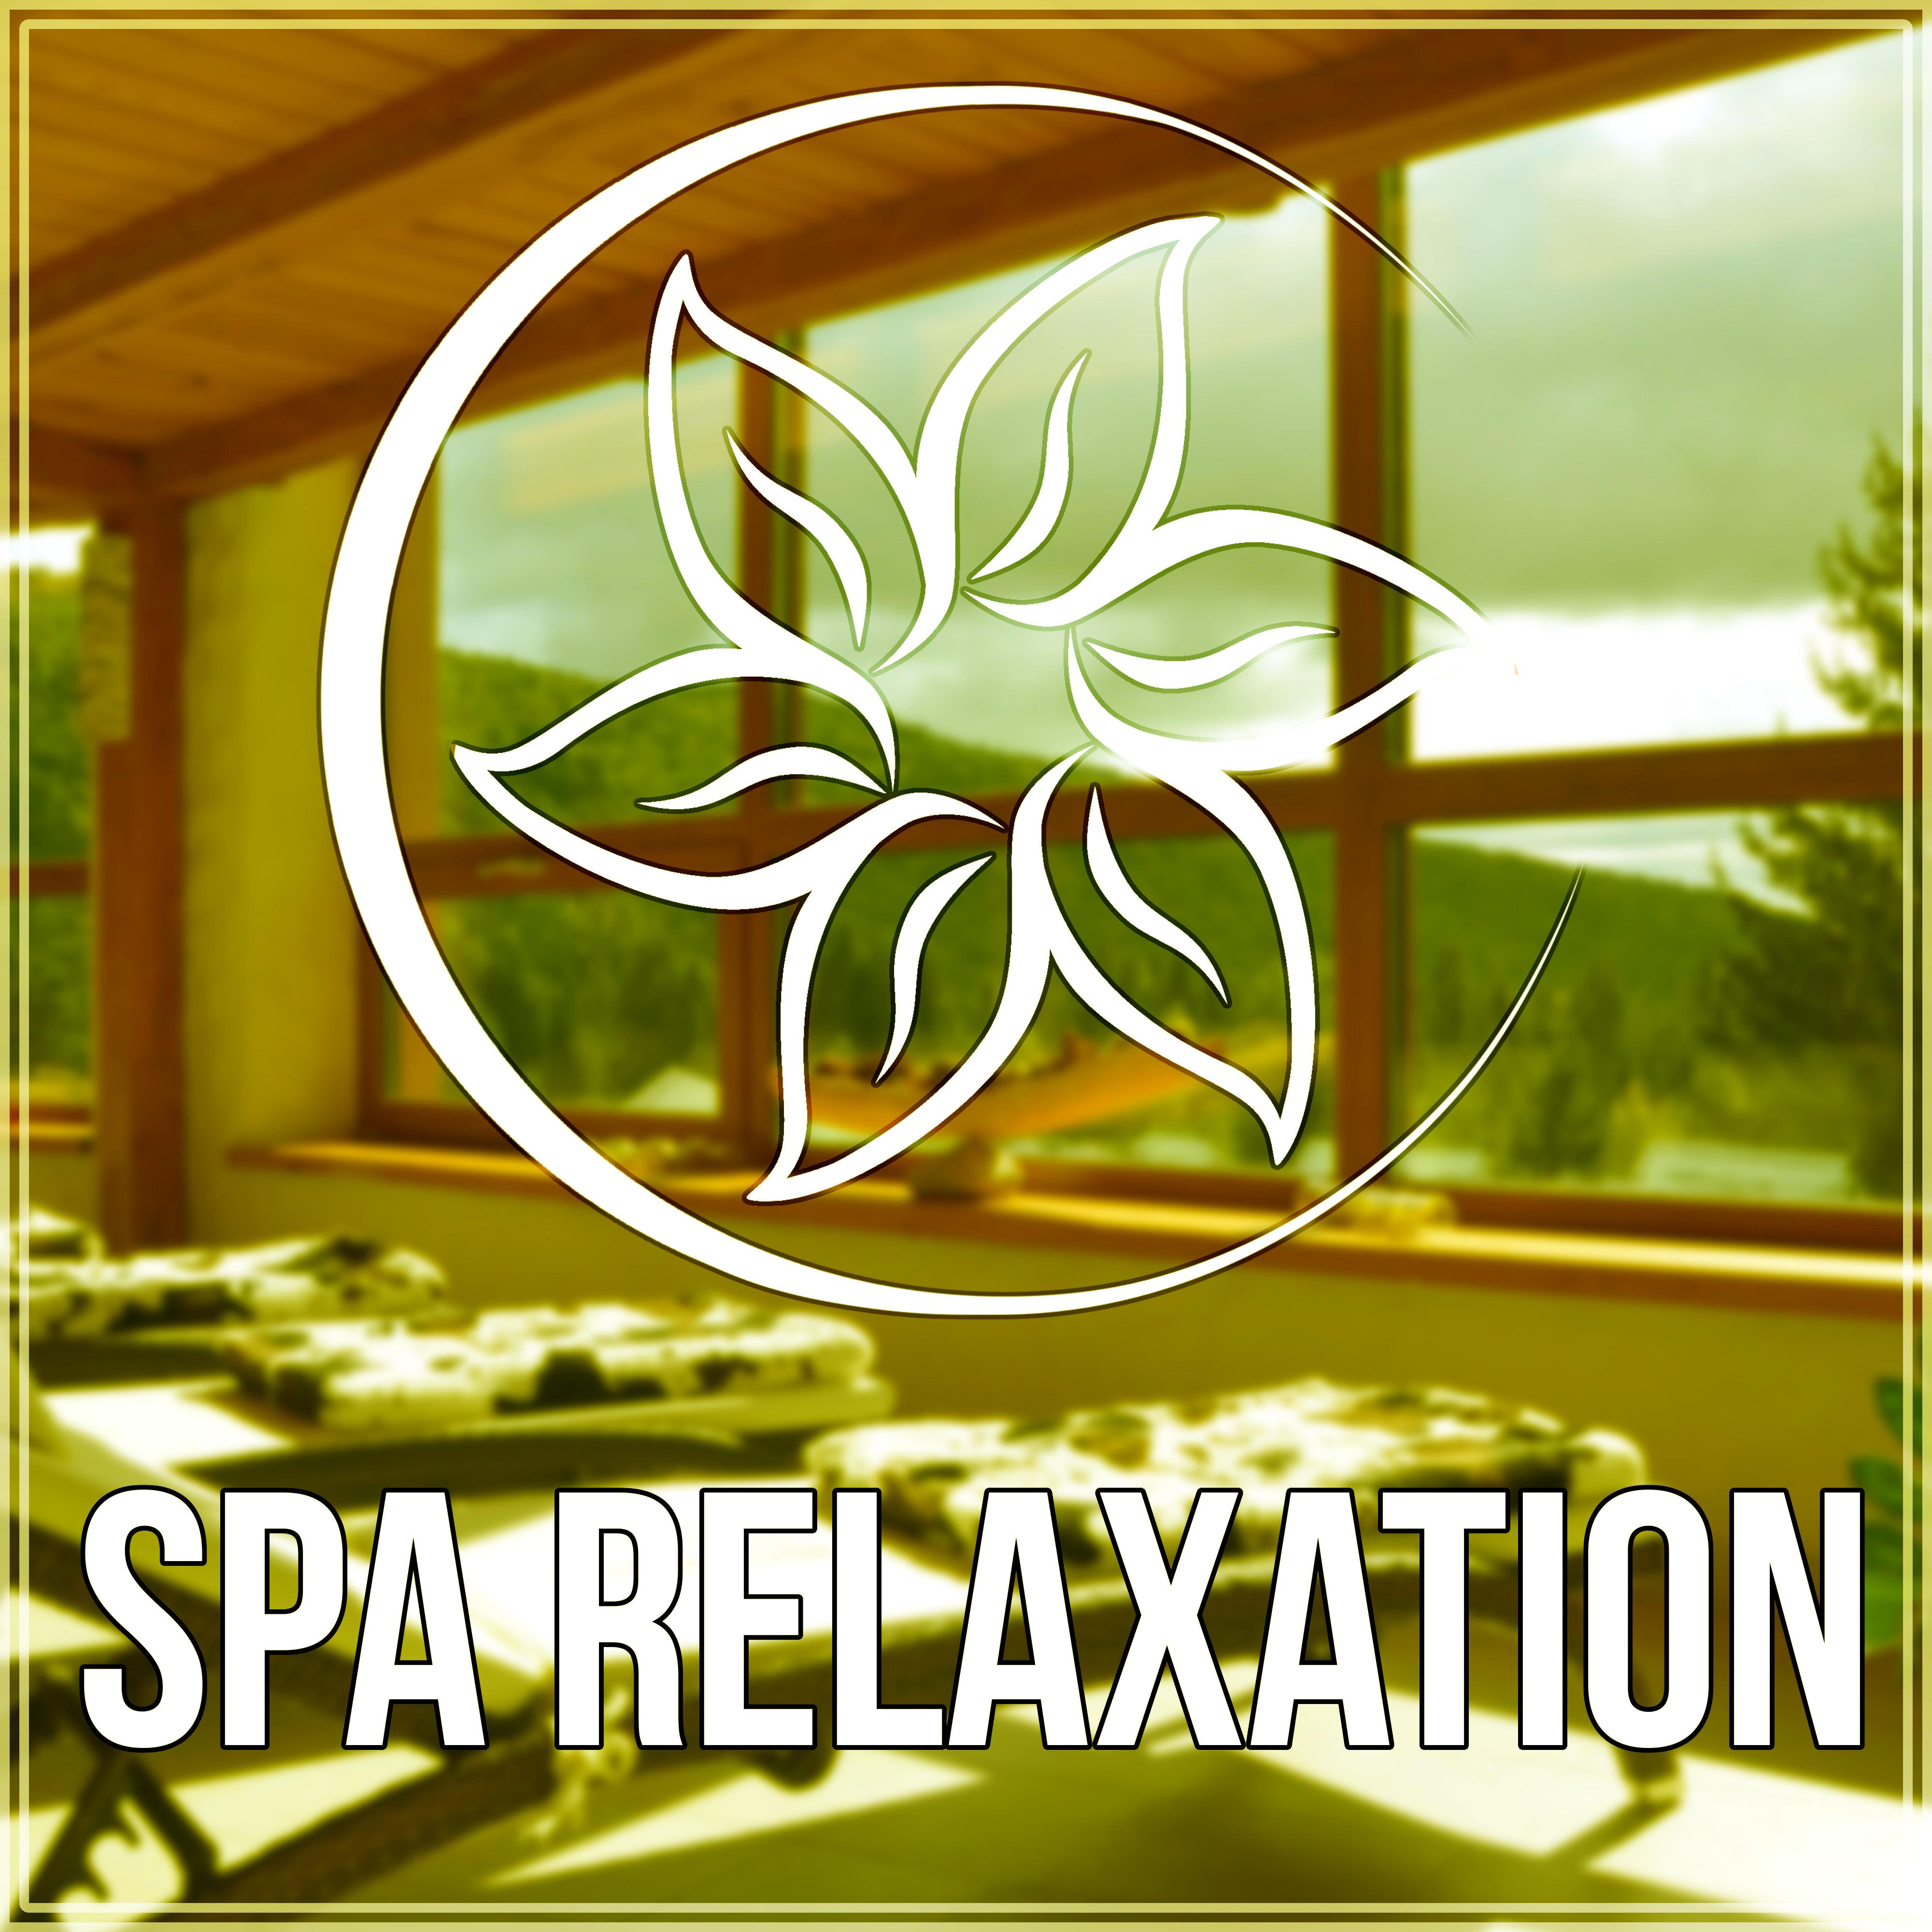 Spa Relaxation -  Massage, Soothing Music, New Age, Pure Nature Sounds, Harmony, Stress Relief, Background Music